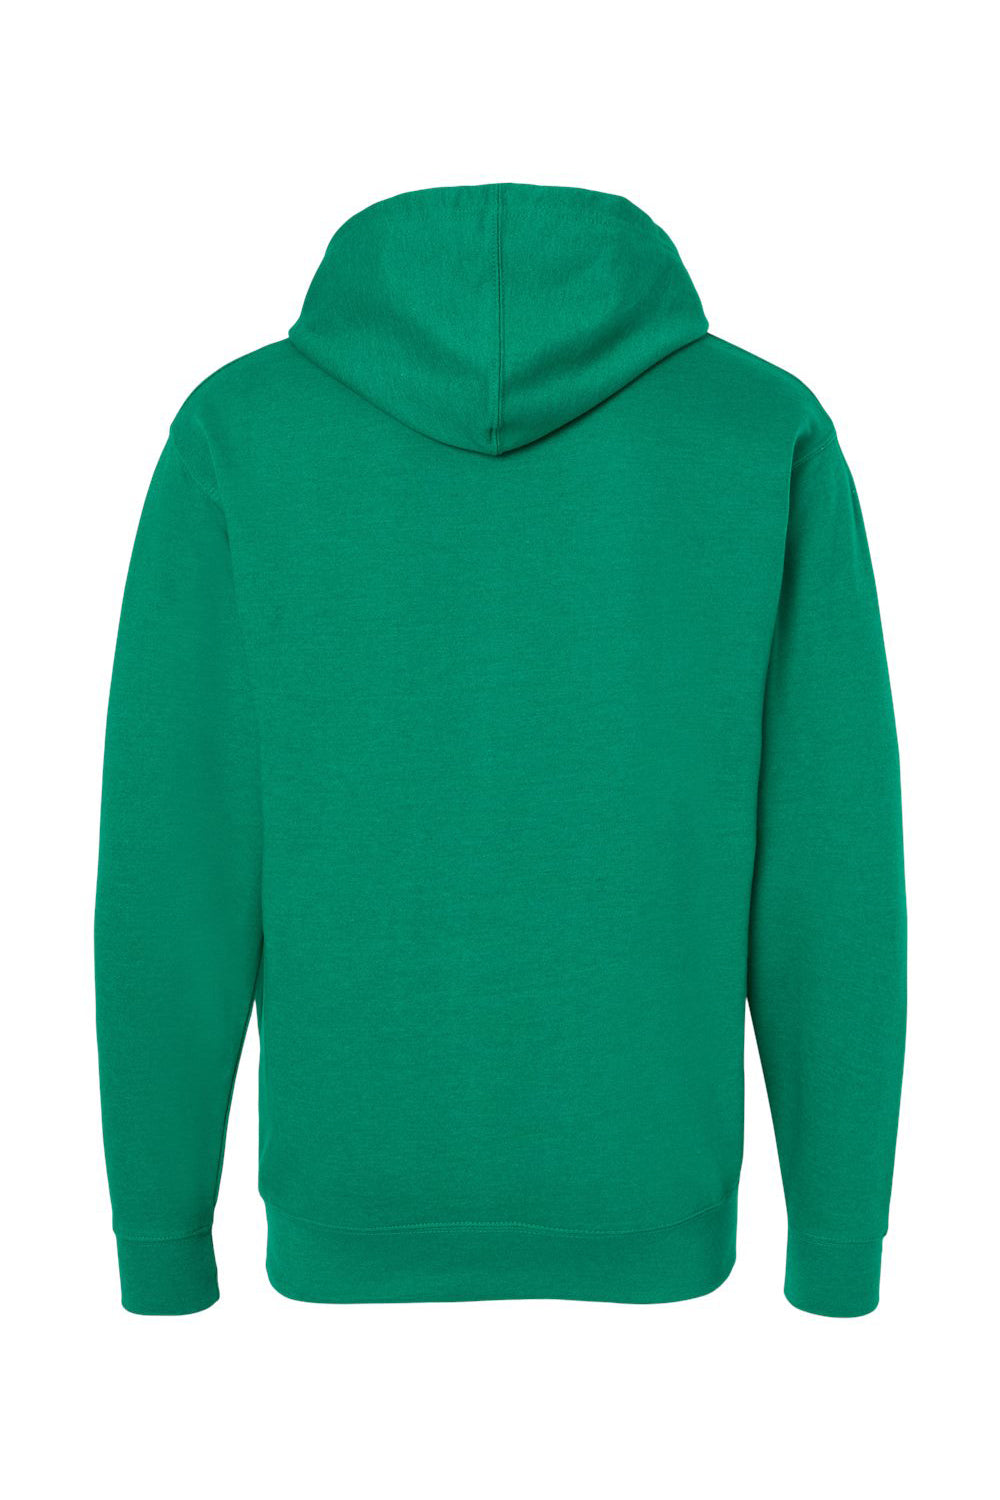 Independent Trading Co. SS4500 Mens Hooded Sweatshirt Hoodie Heather Kelly Green Flat Back